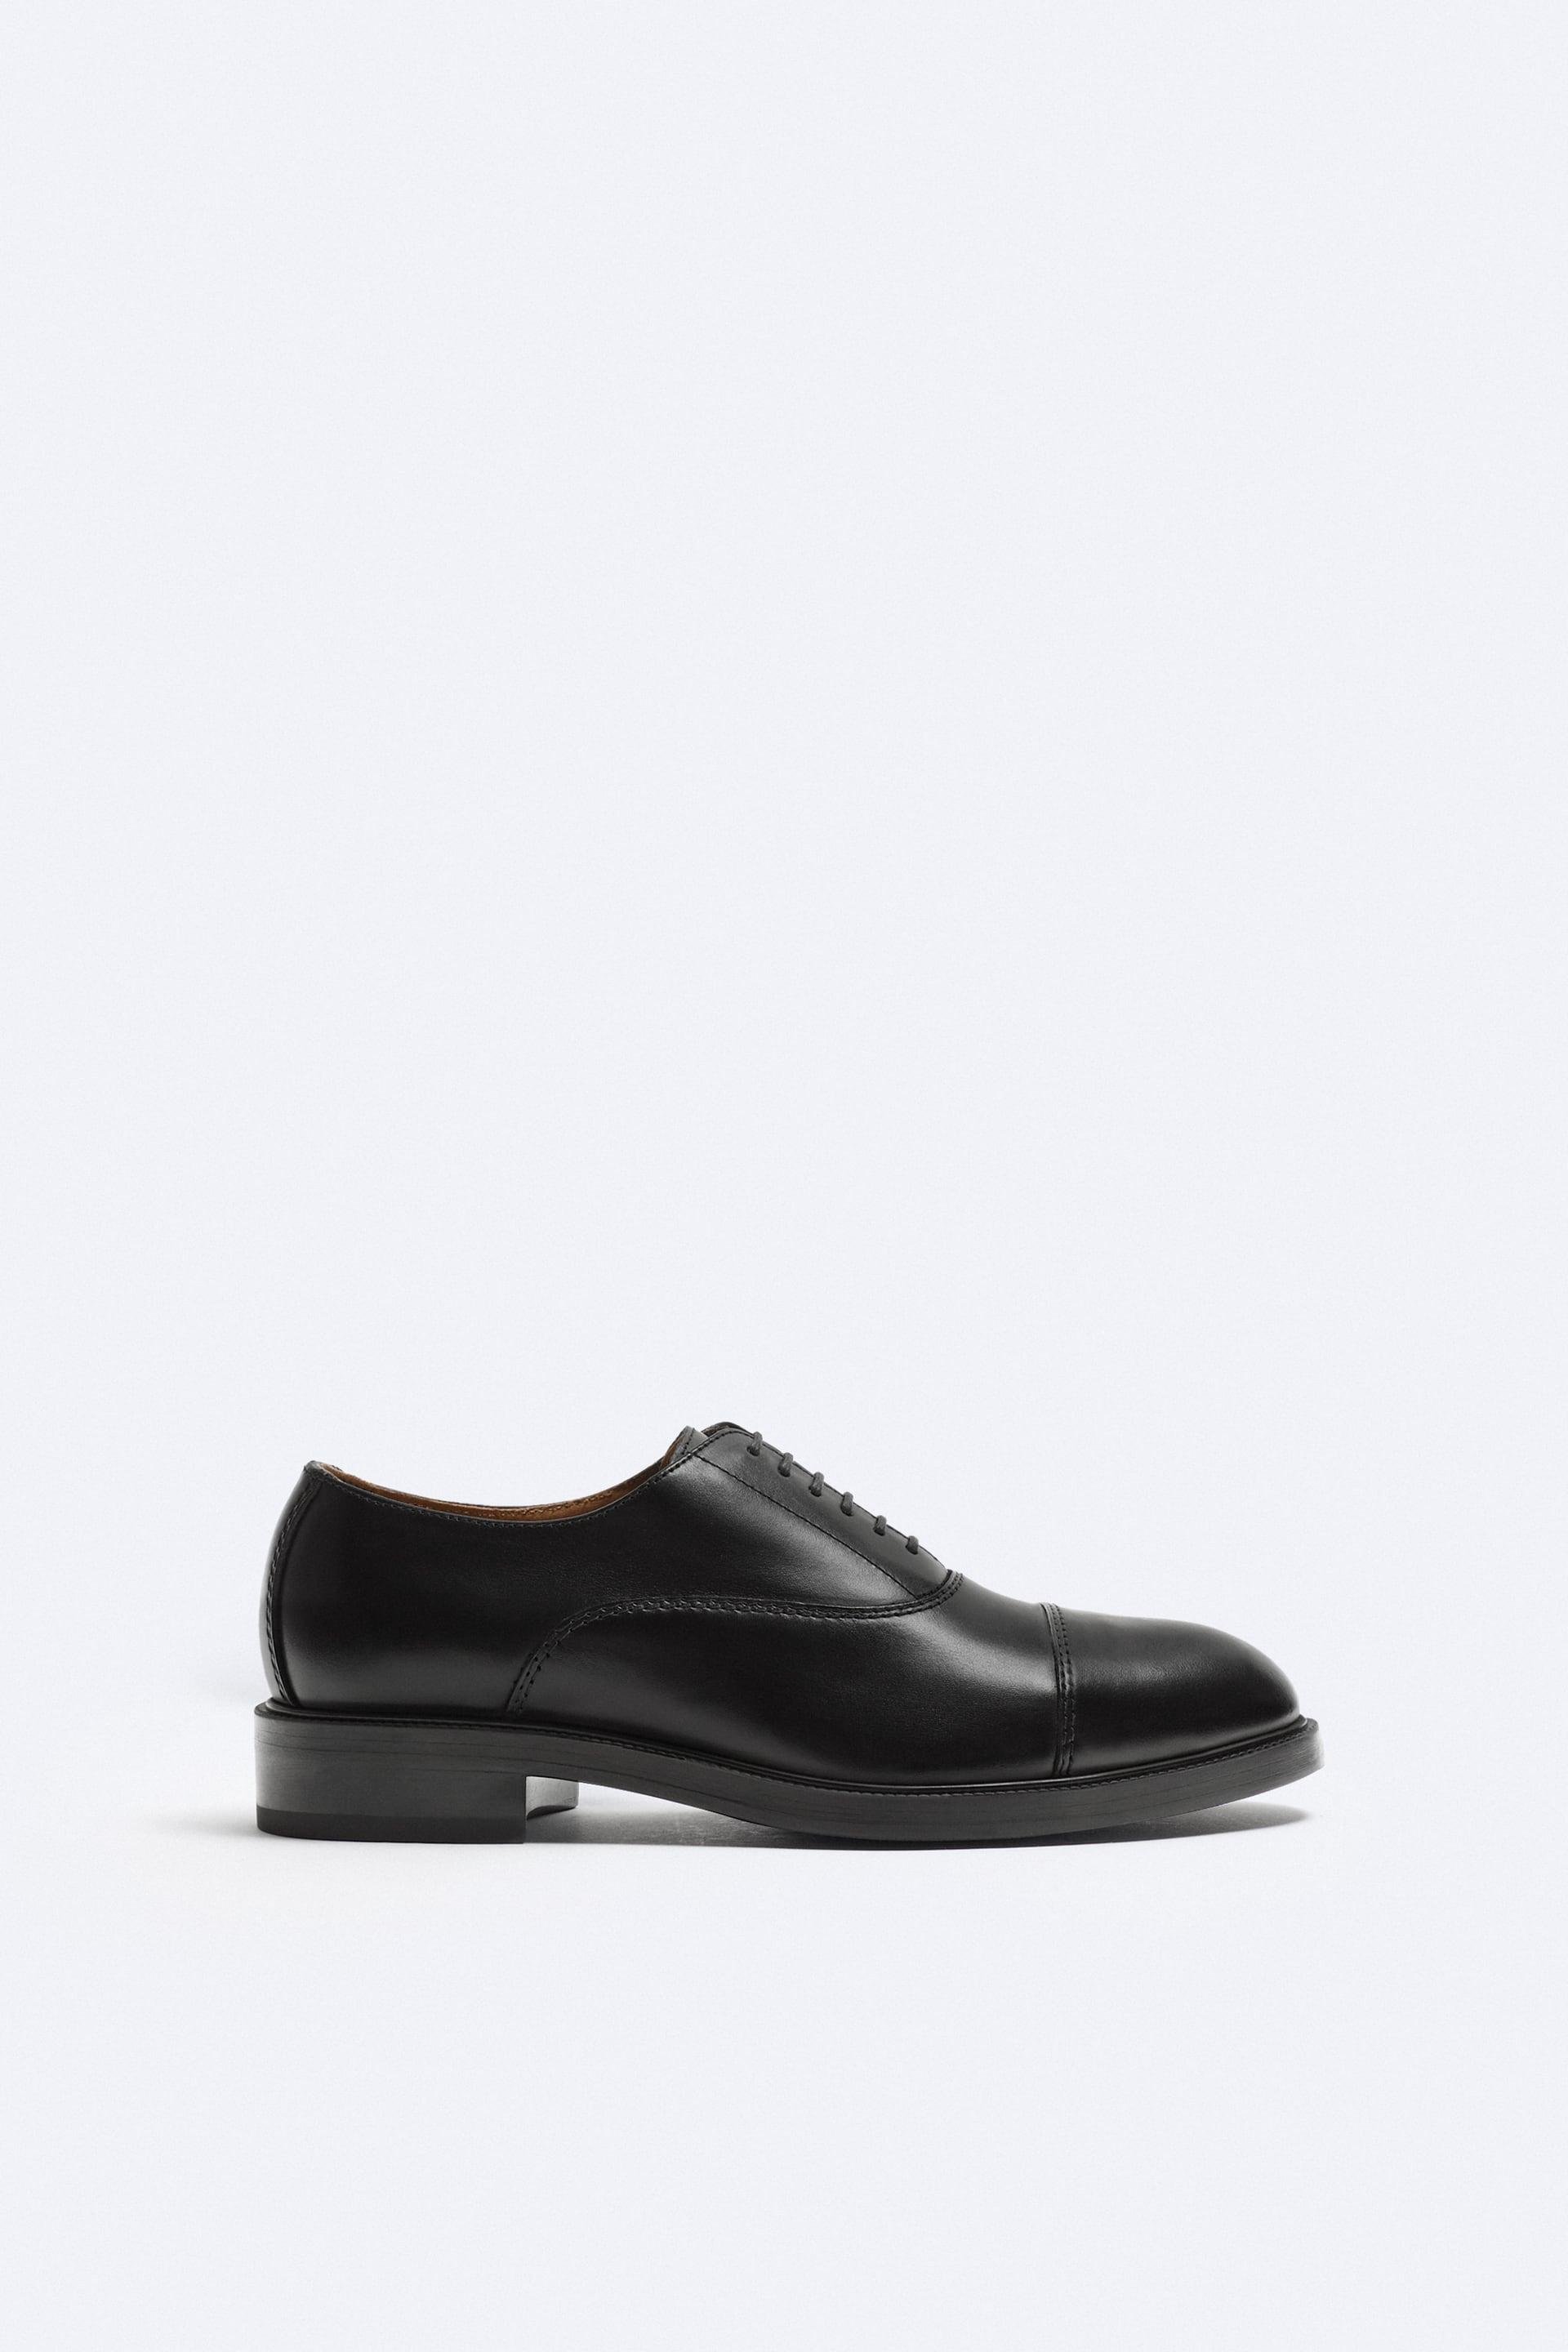 LEATHER OXFORD SHOES by ZARA